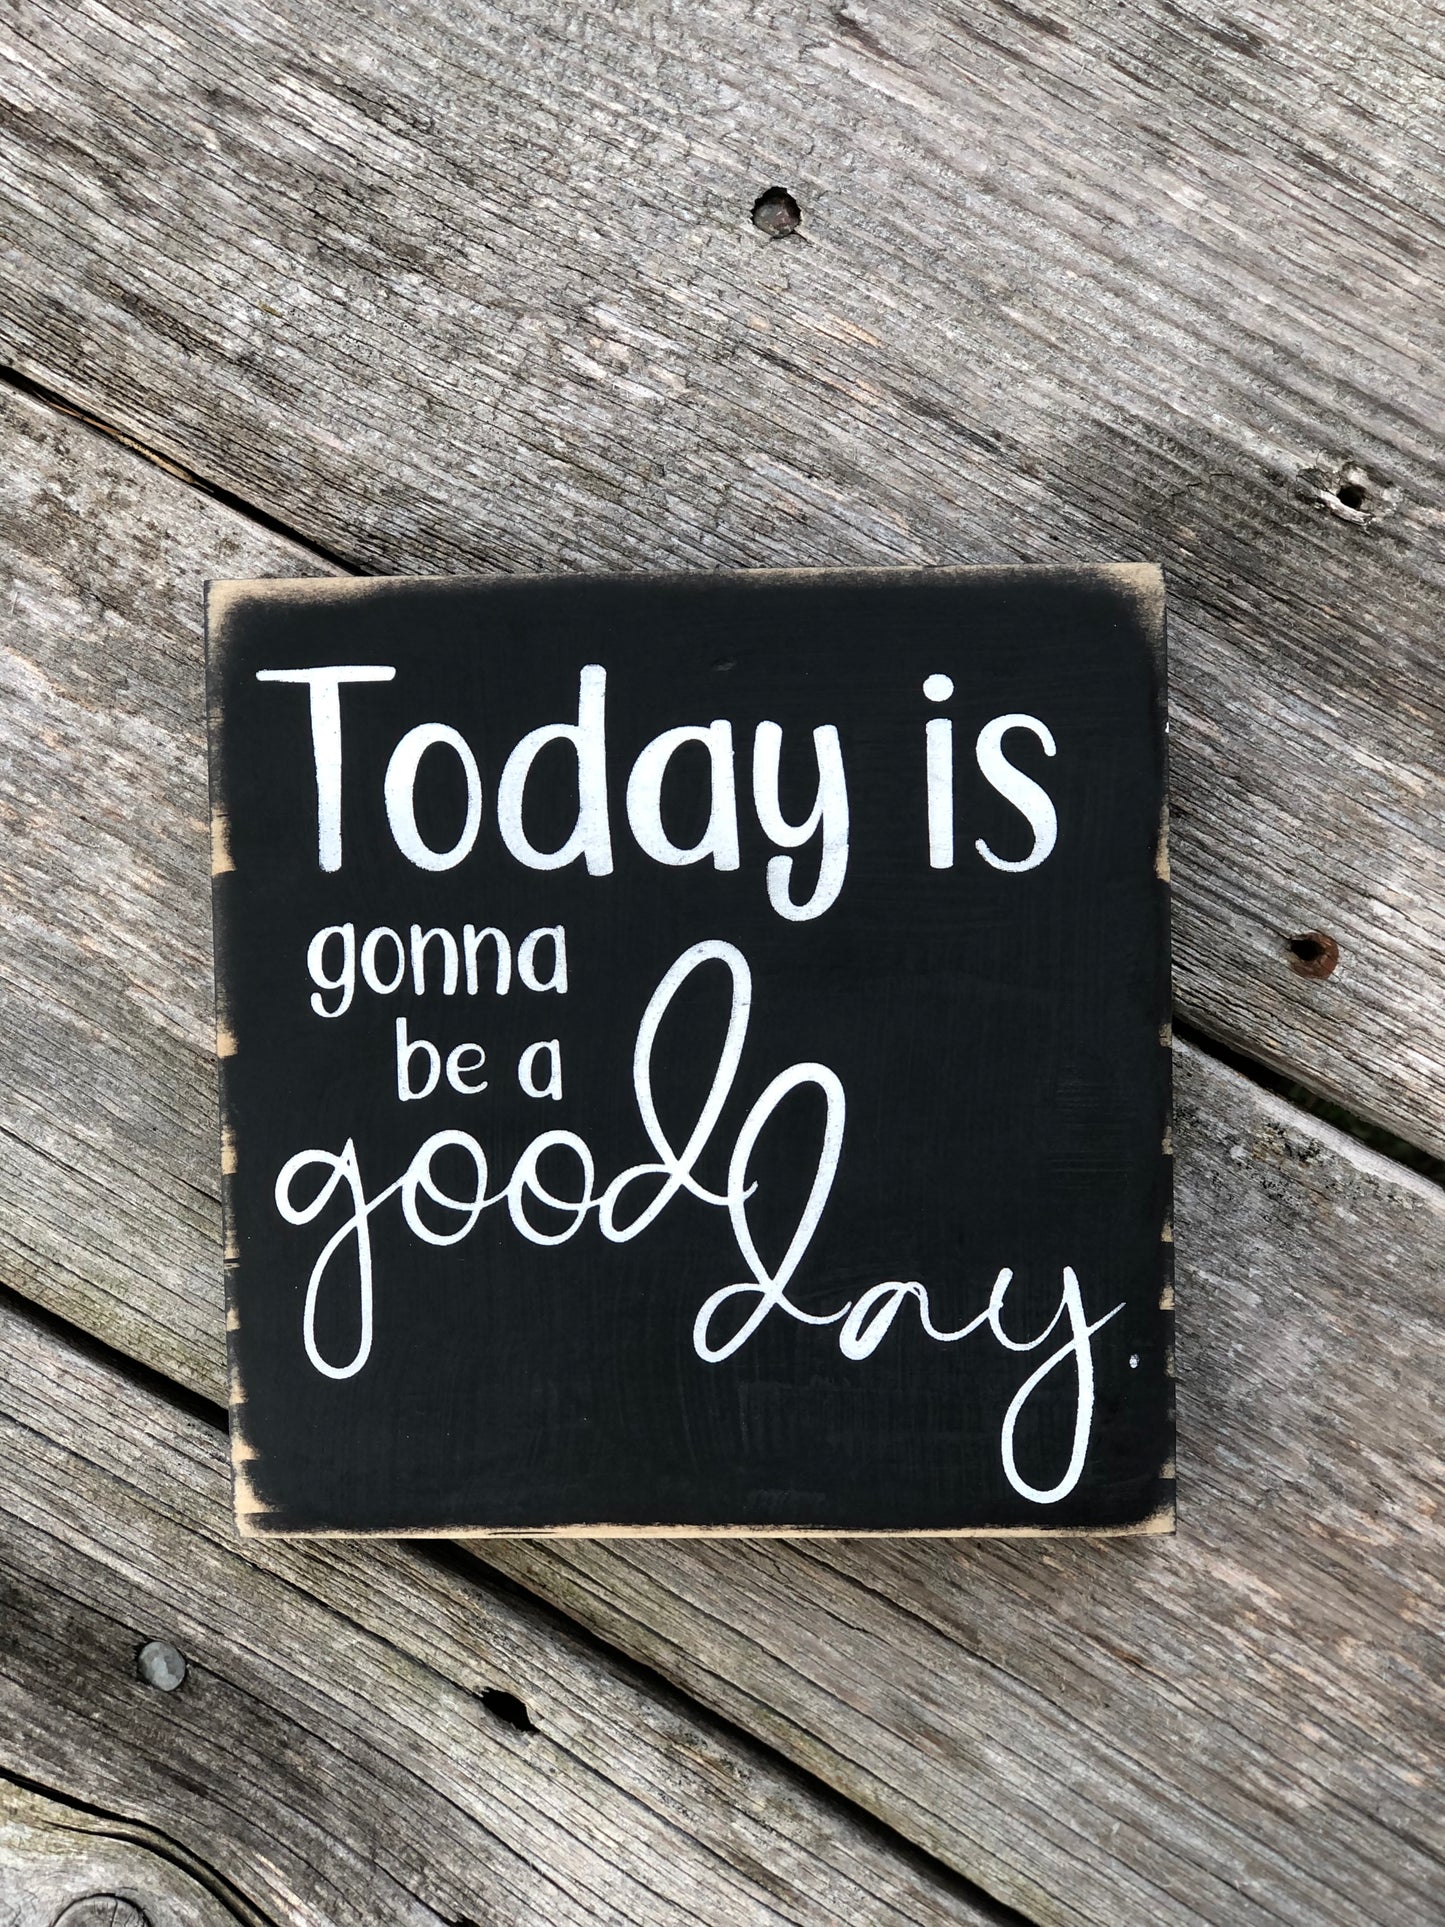 TODAY IS GONNA BE A GOOD DAY -WOOD SIGN